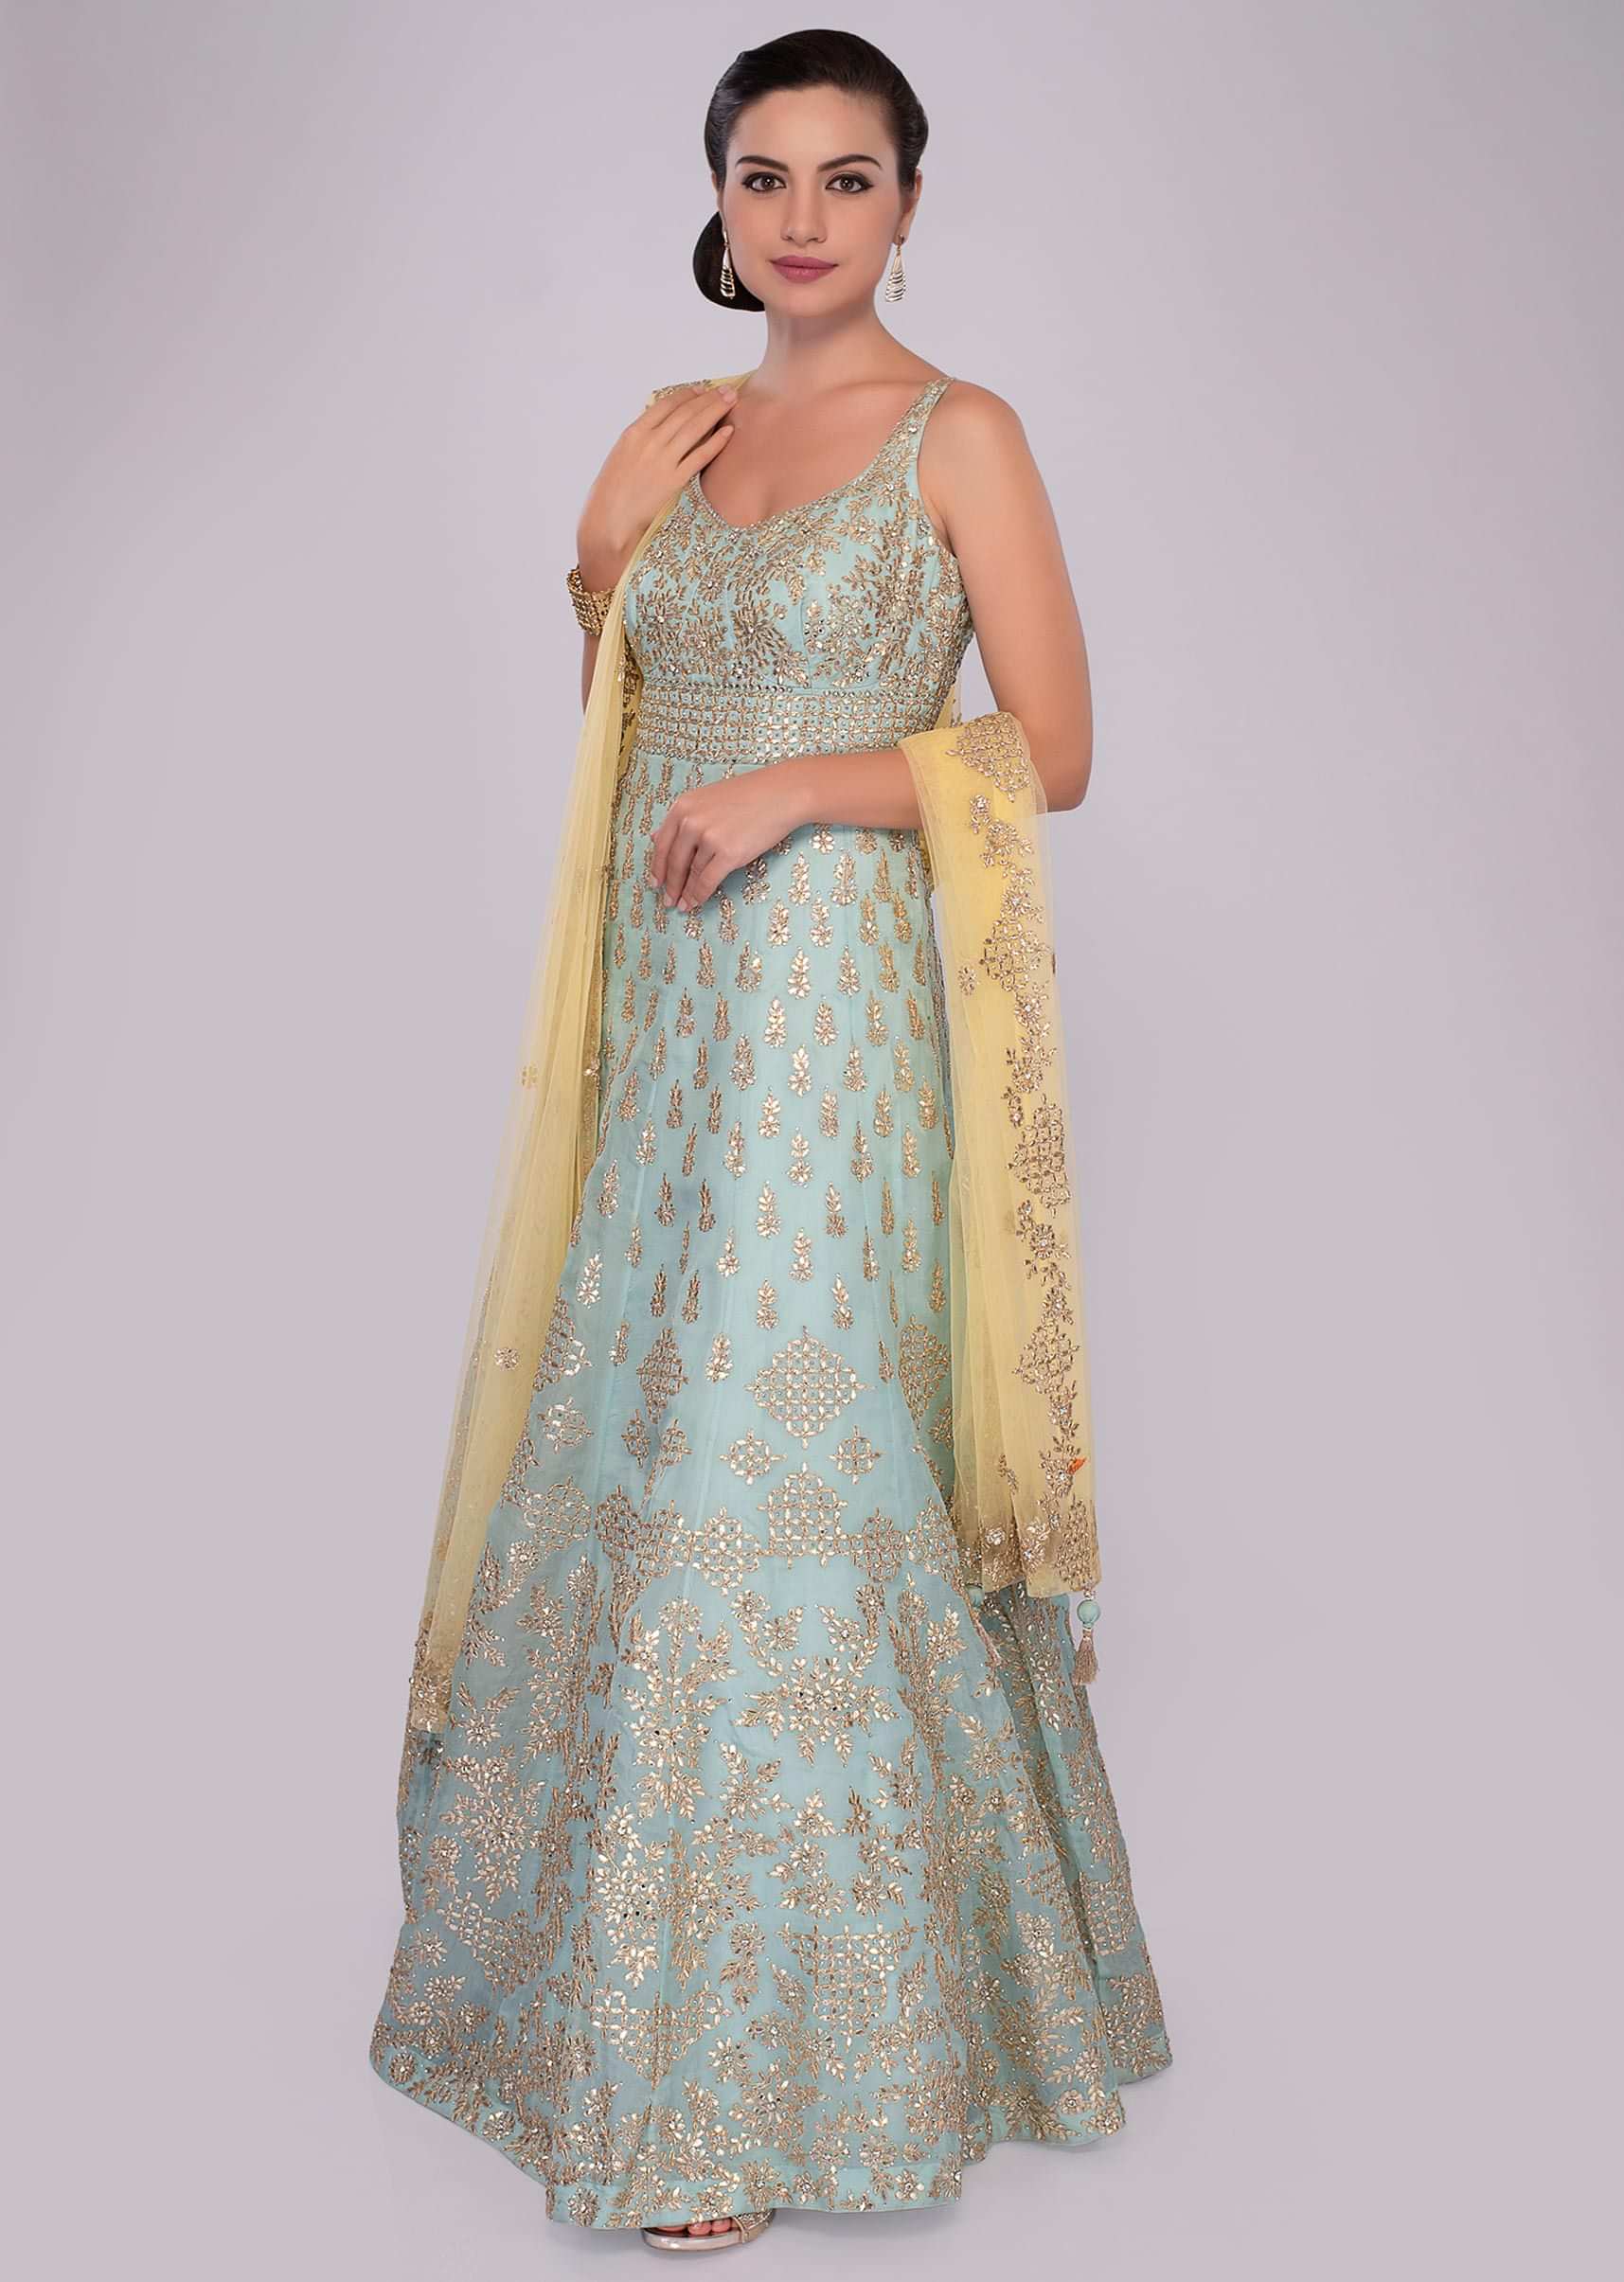 Turq blue anarkali gown in floral embroidery and butti